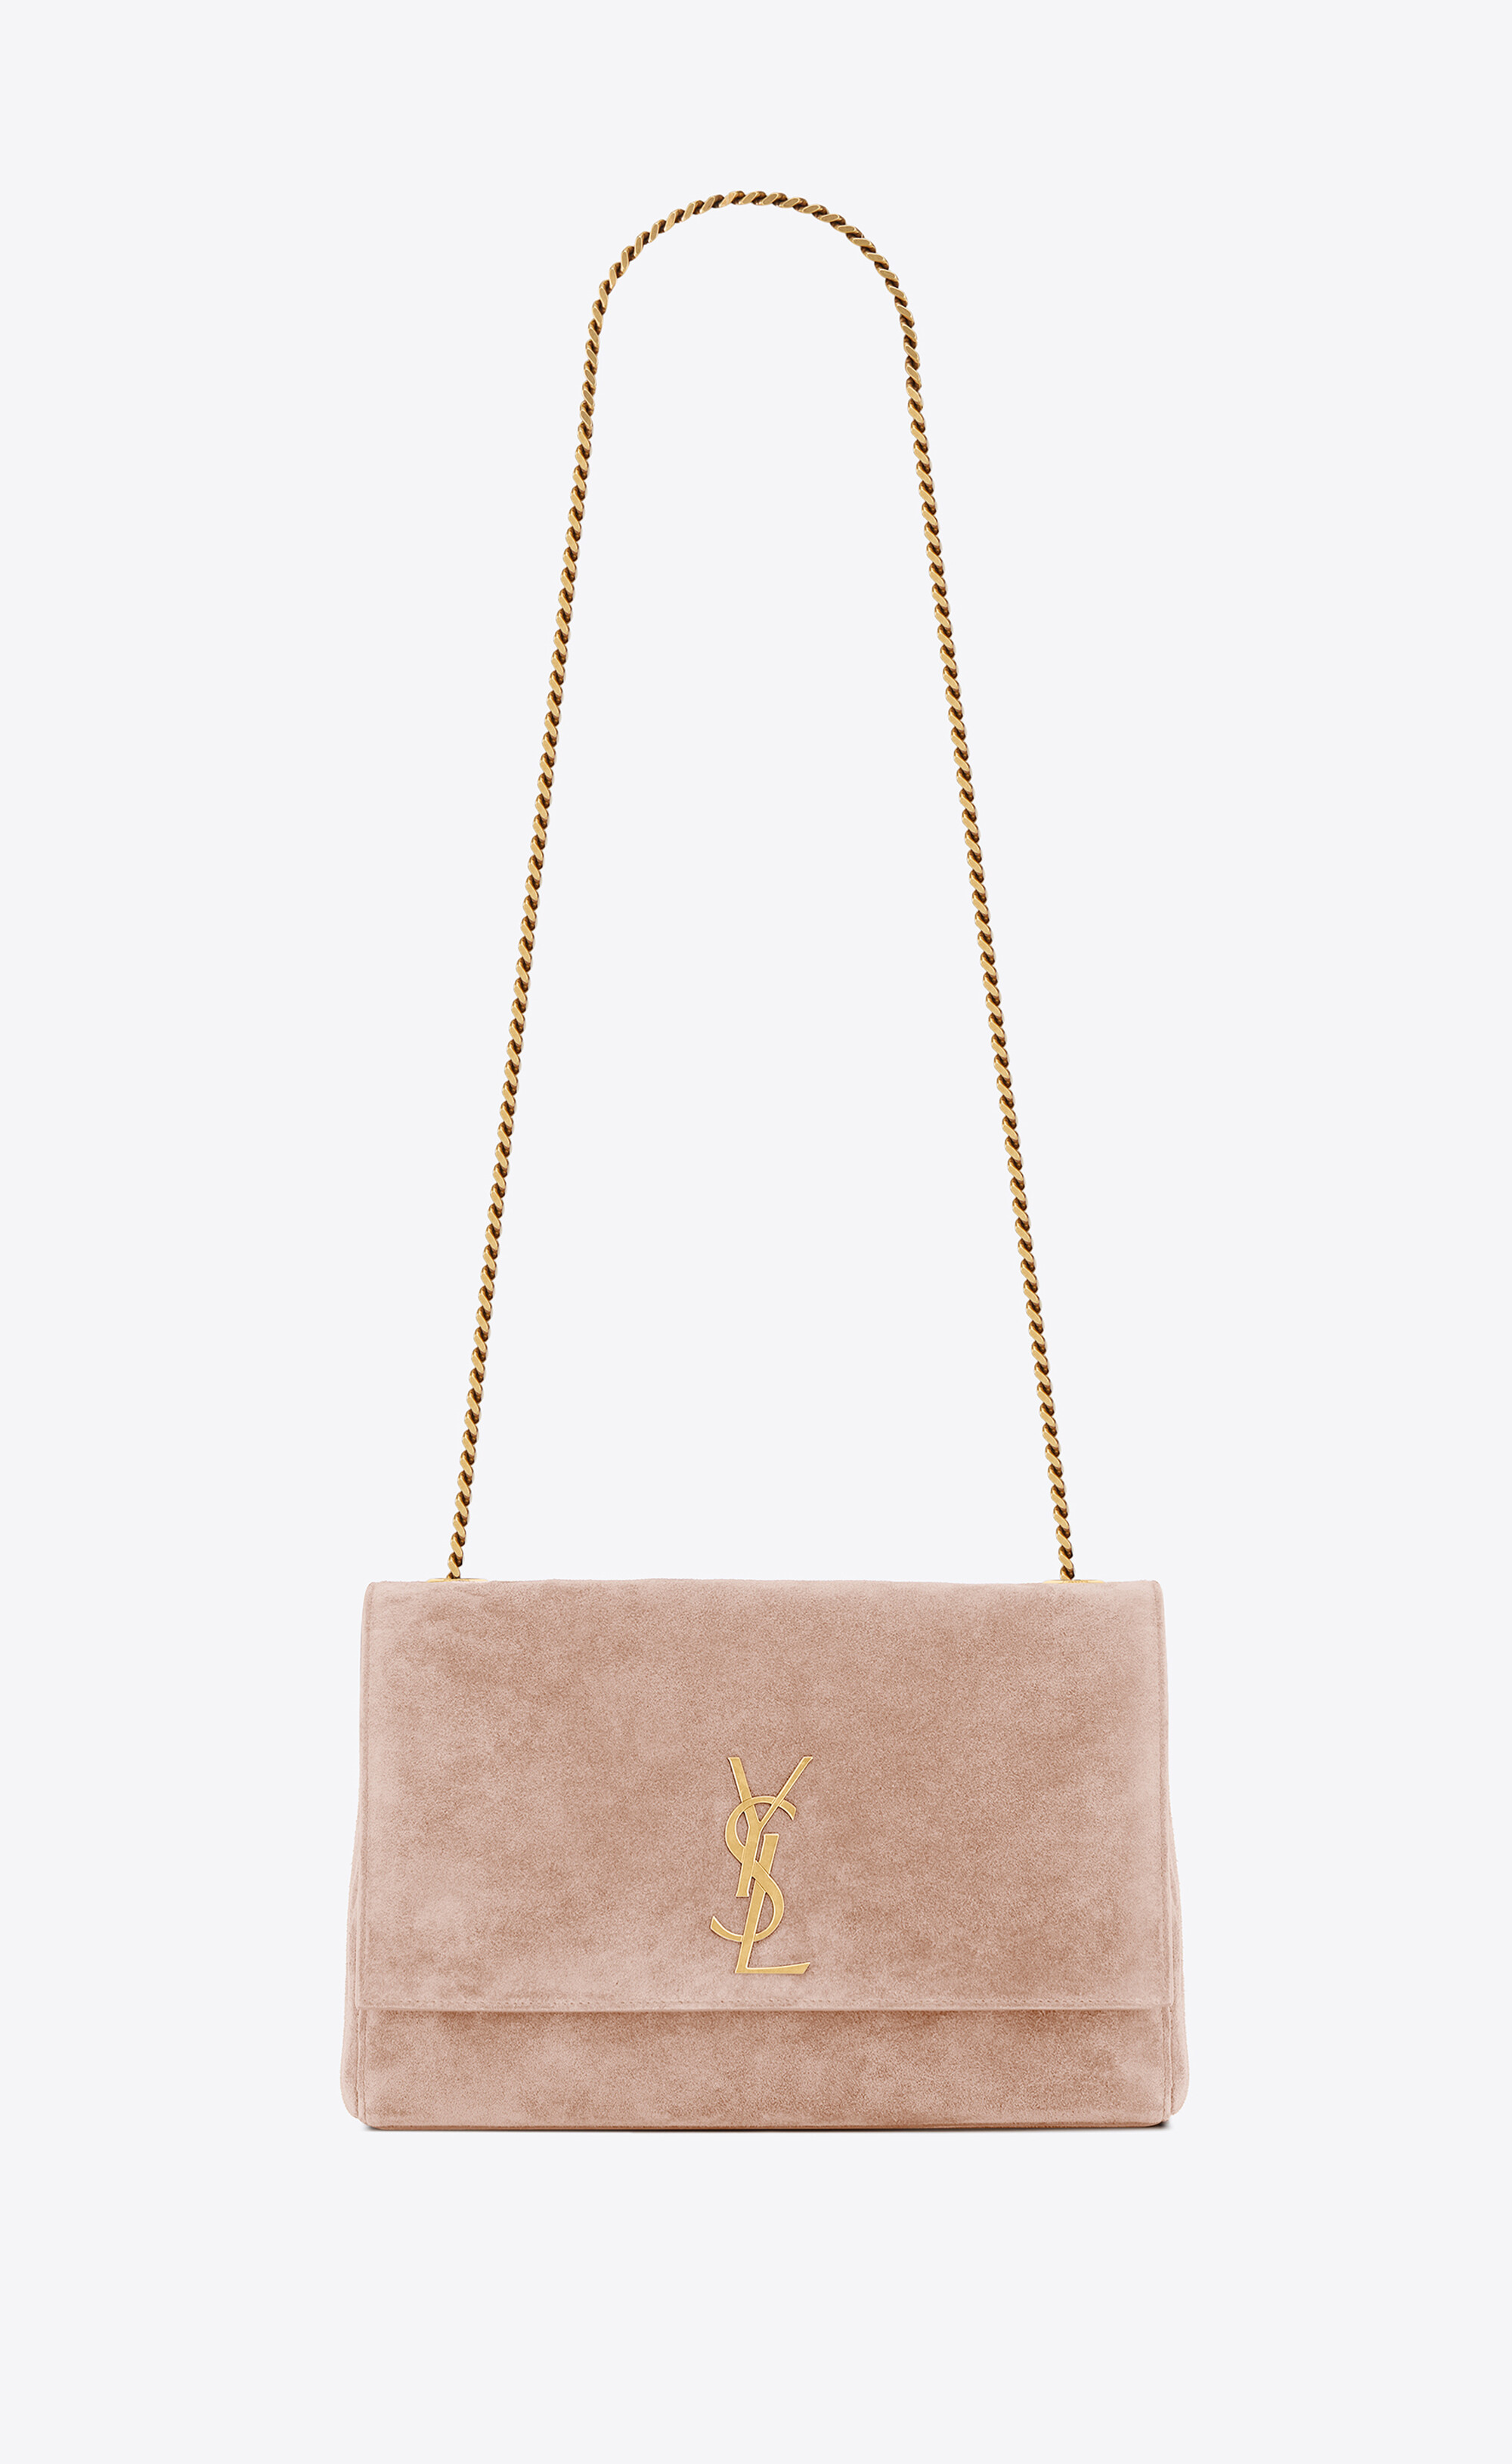 kate medium supple/reversible chain bag in shiny leather and suede